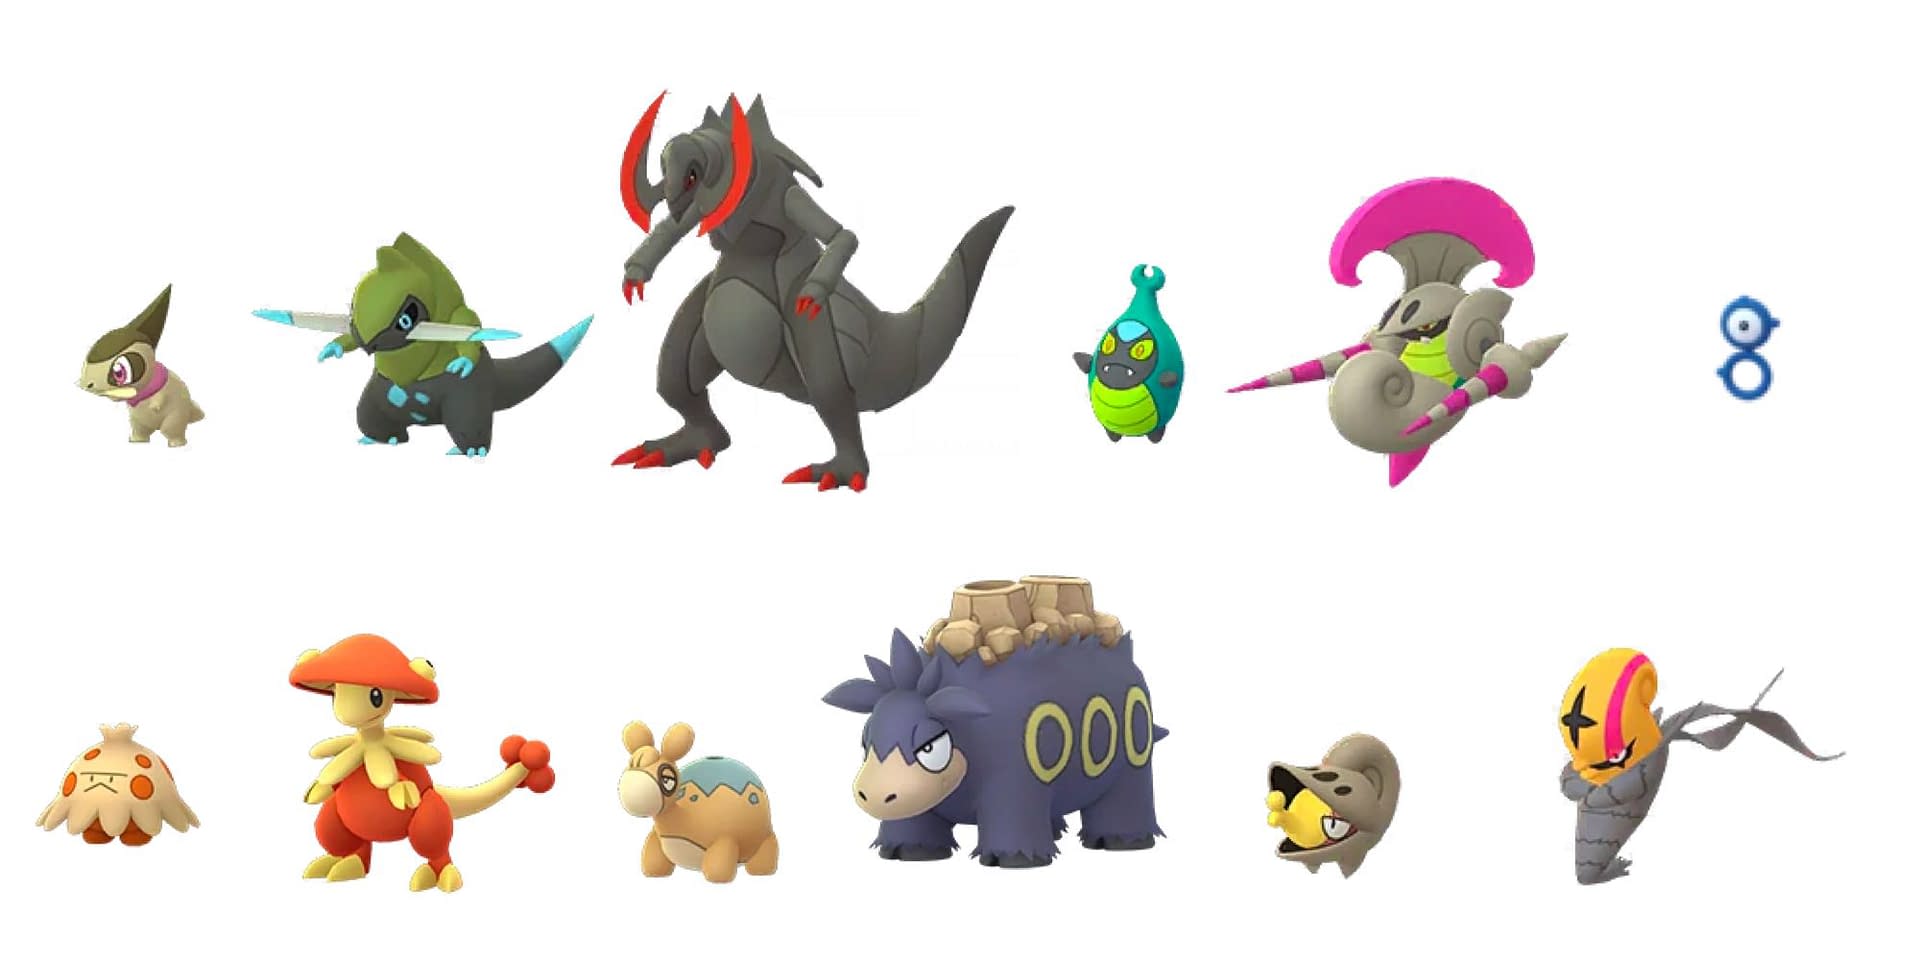 Continued Go Fest Celebrations Bring New Ultra Beasts